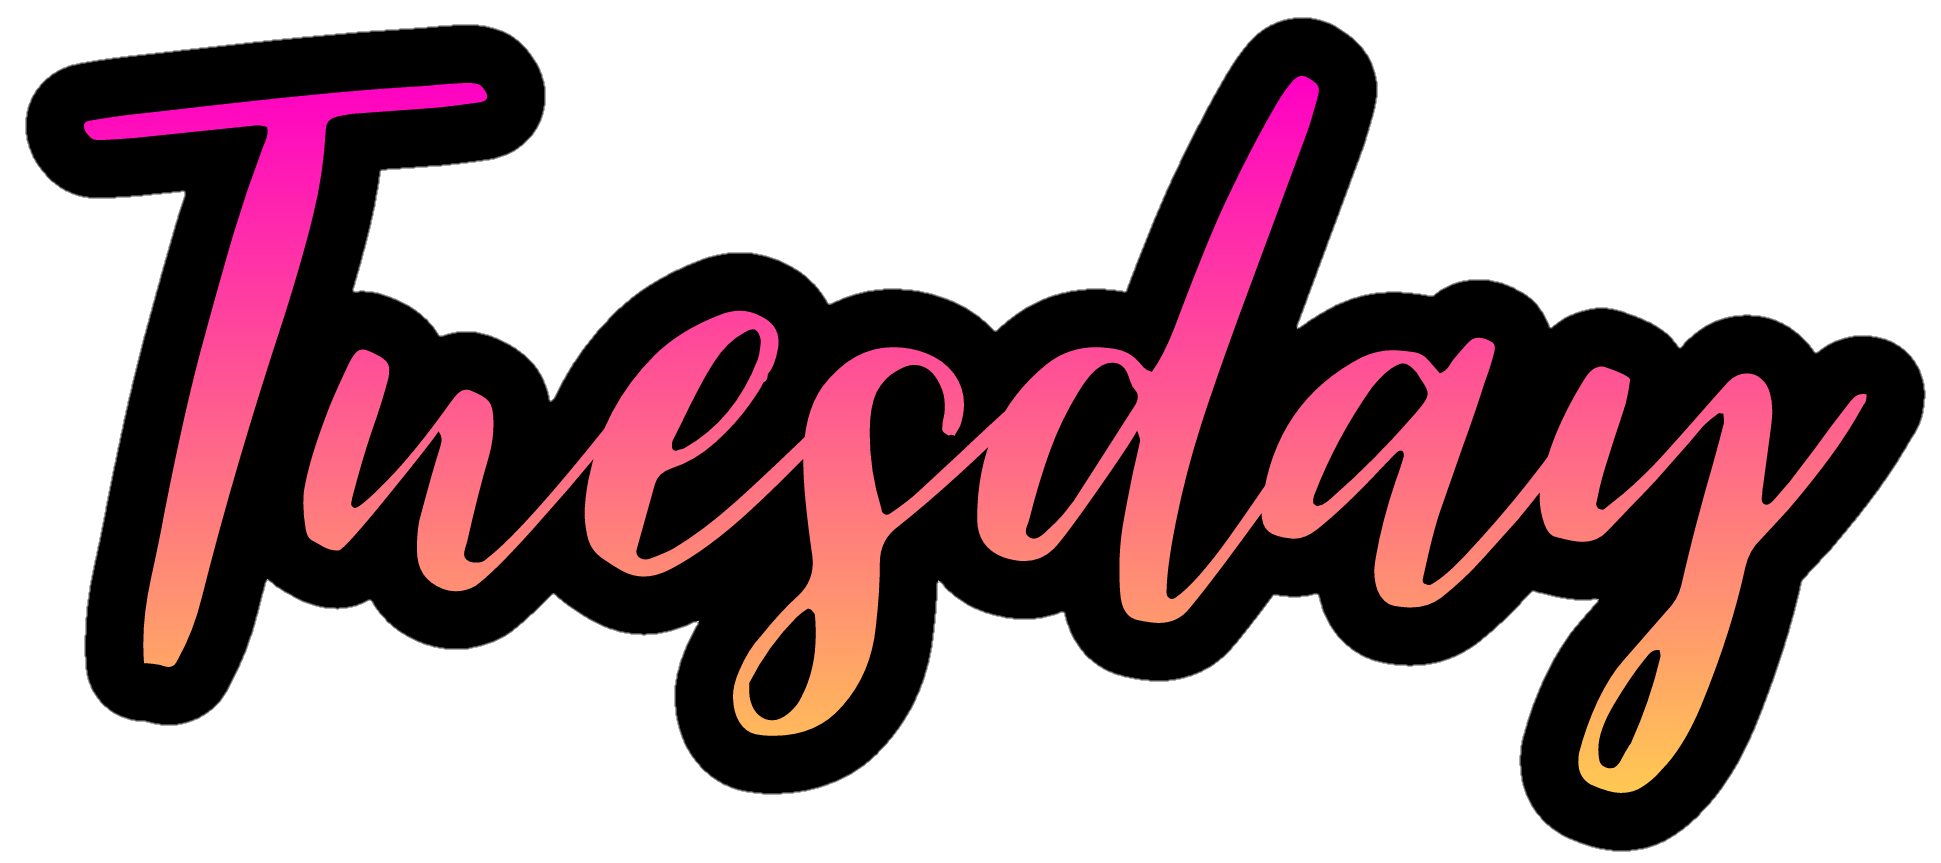 tuesday text freetoedit #tuesday #text sticker by @nate999